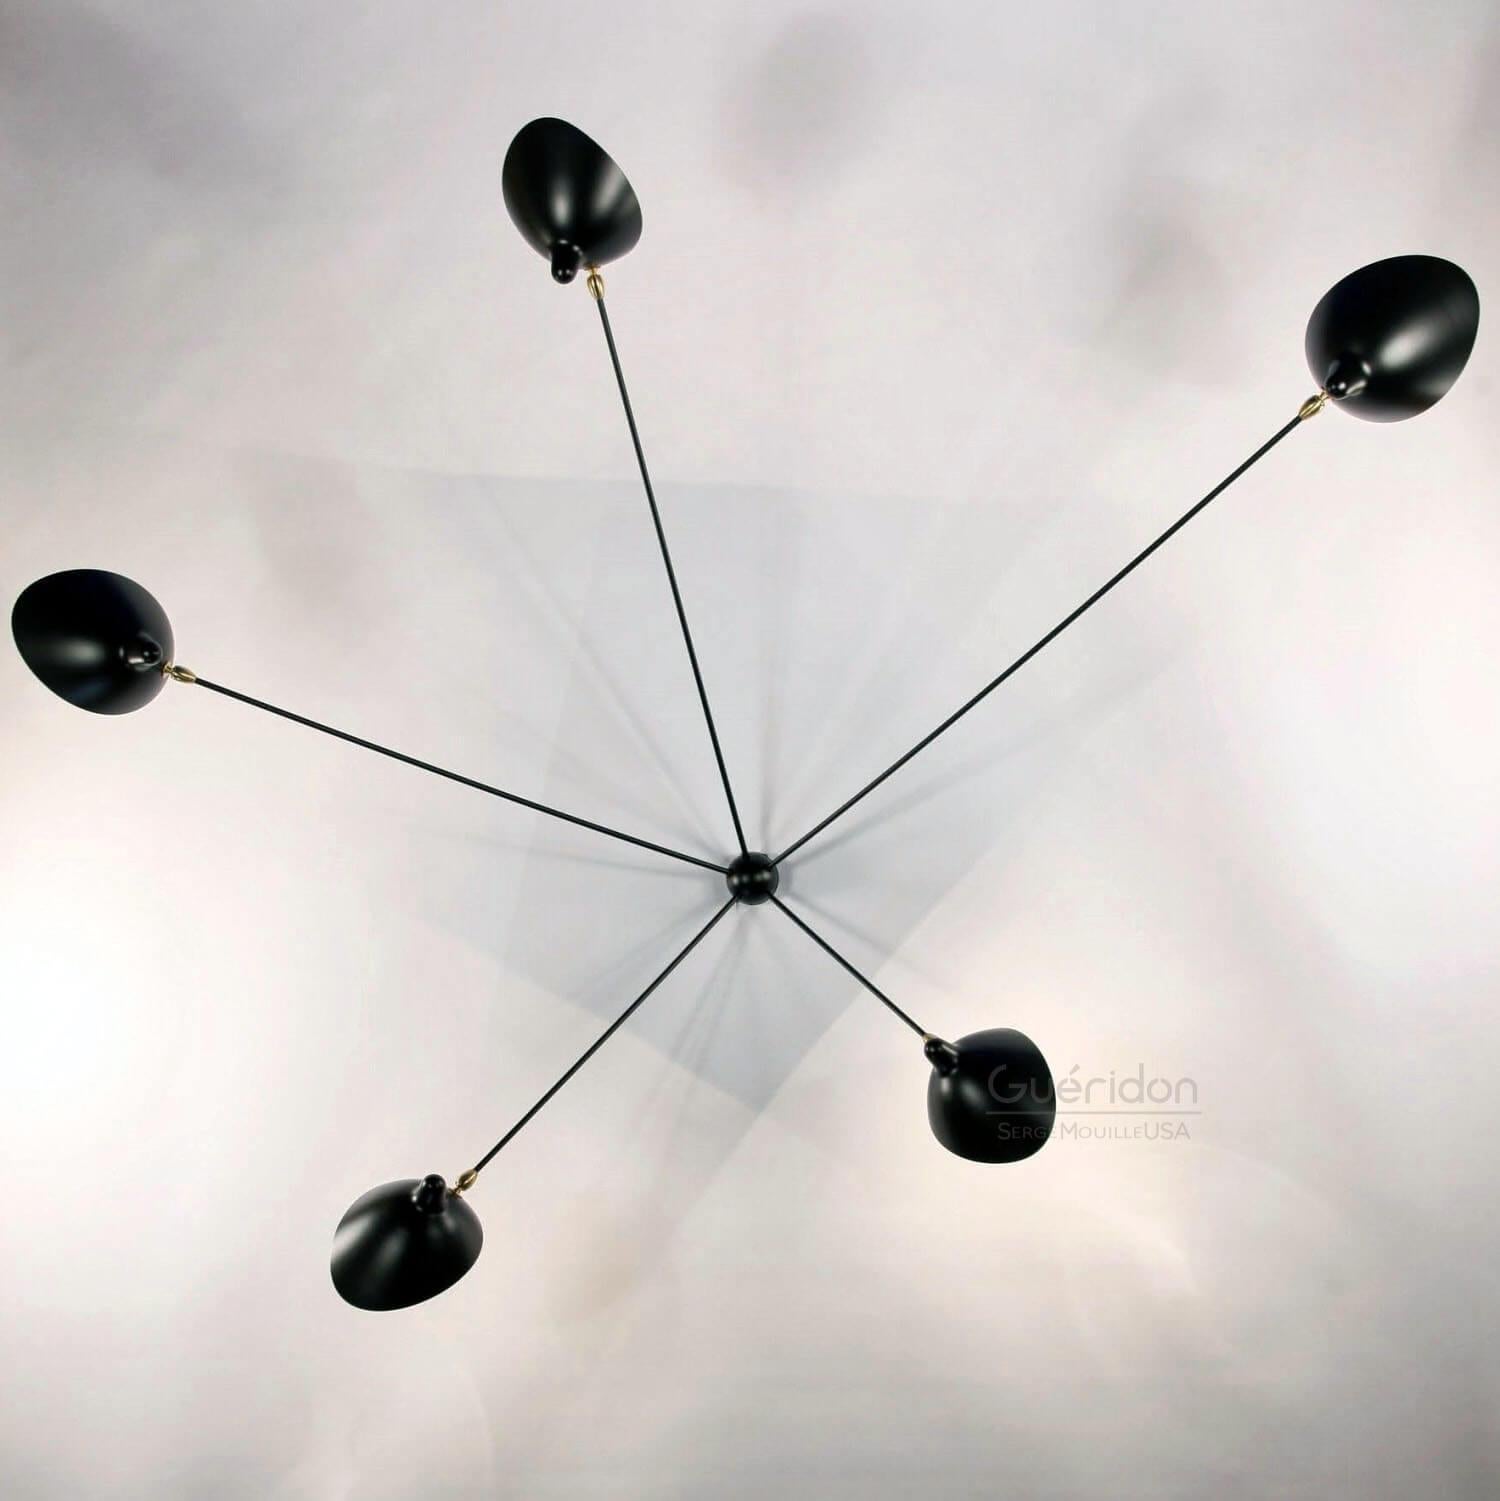 Painted Serge Mouille - Spider Sconce with 5 Arms in Black or White For Sale